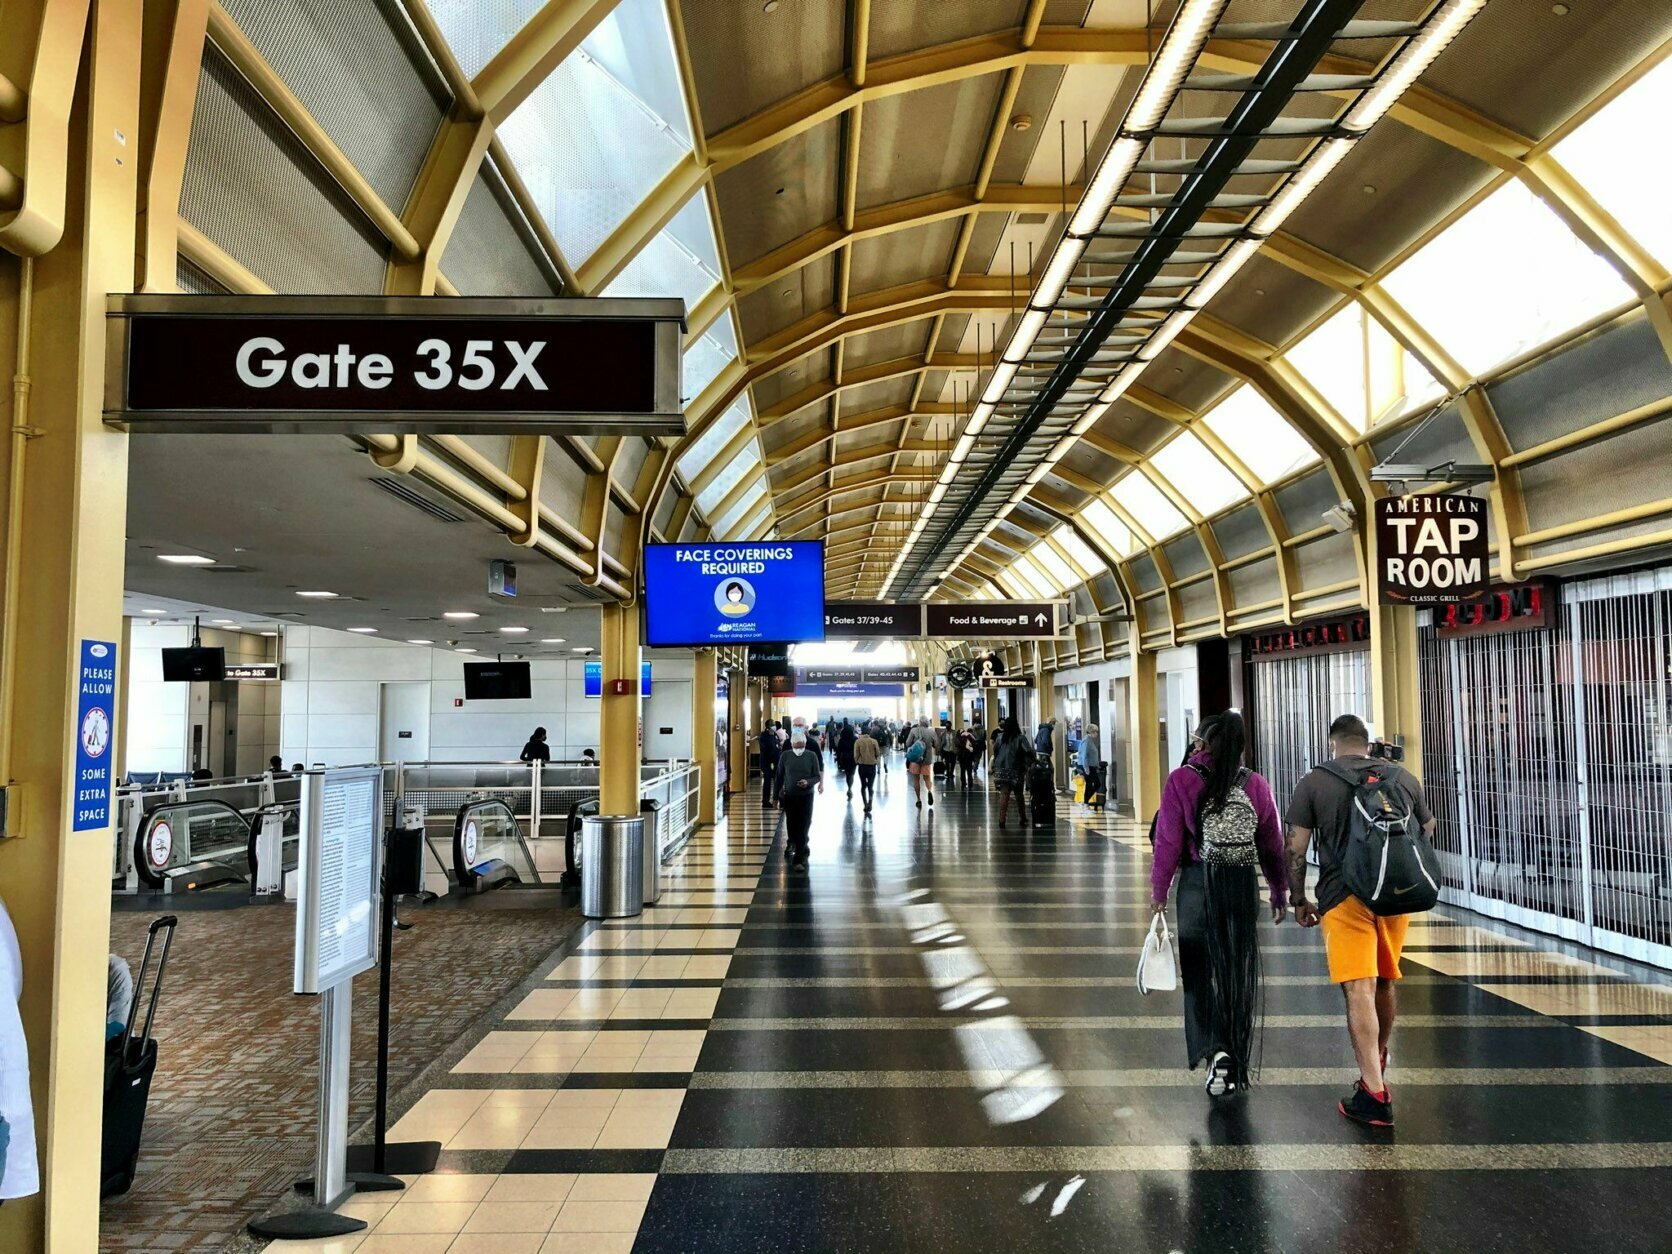 <p>Starting April 20, passengers will be able to walk to 14 newly-built gates, which will be the home of American Airlines&#8217; regional service.</p>
<p>Until now, 35X has been a less-than-comfortable experience for passengers, said vice president and airport manager Paul Malandrino.</p>
<p>“It was a very crowded, old room. Regardless of the weather, you had to walk outside, get on your bus, take the bus, get off the bus, in the weather, get on your airplane,” said Malandrino.</p>
<p>Glen Zacek, director of customer service for the airline at the airport, didn’t disagree.</p>
<p>“The whole busing operation, the hardstands and everything, was really just built out of necessity,” Zacek said. “This is built for the customer.”</p>
<p>On Thursday, reporters were offered the chance to see the concourse before it opens to the public.</p>
